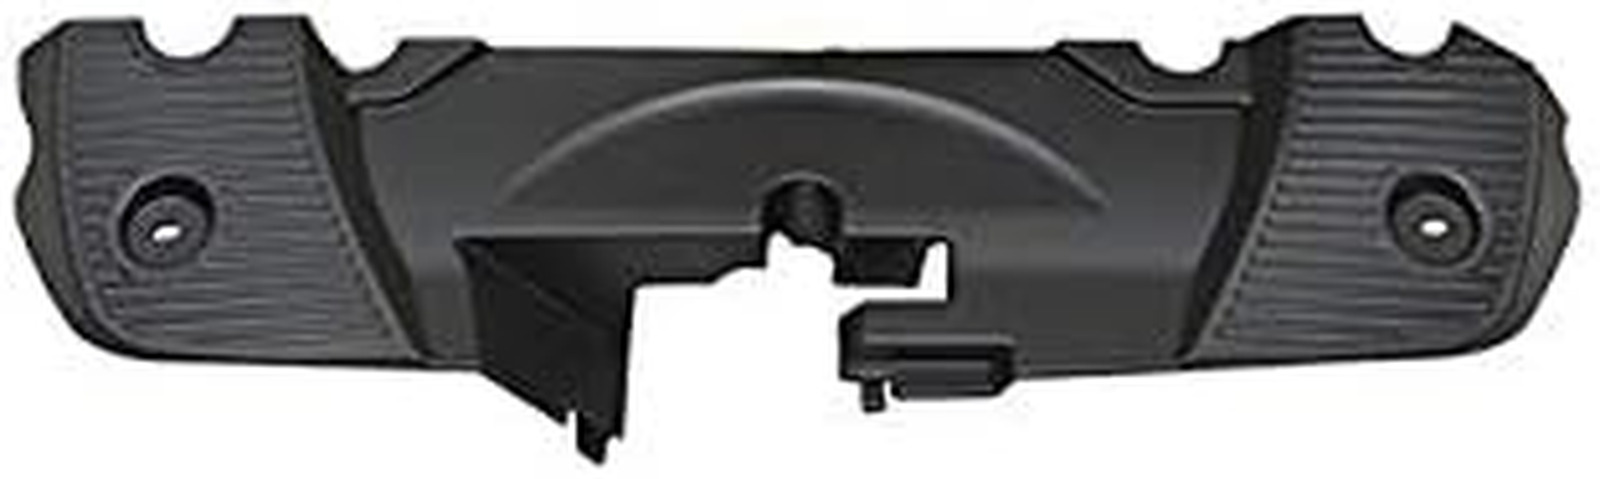 Upper Radiator Support Cover - Compatible with 2006-2013 Chevy Impala